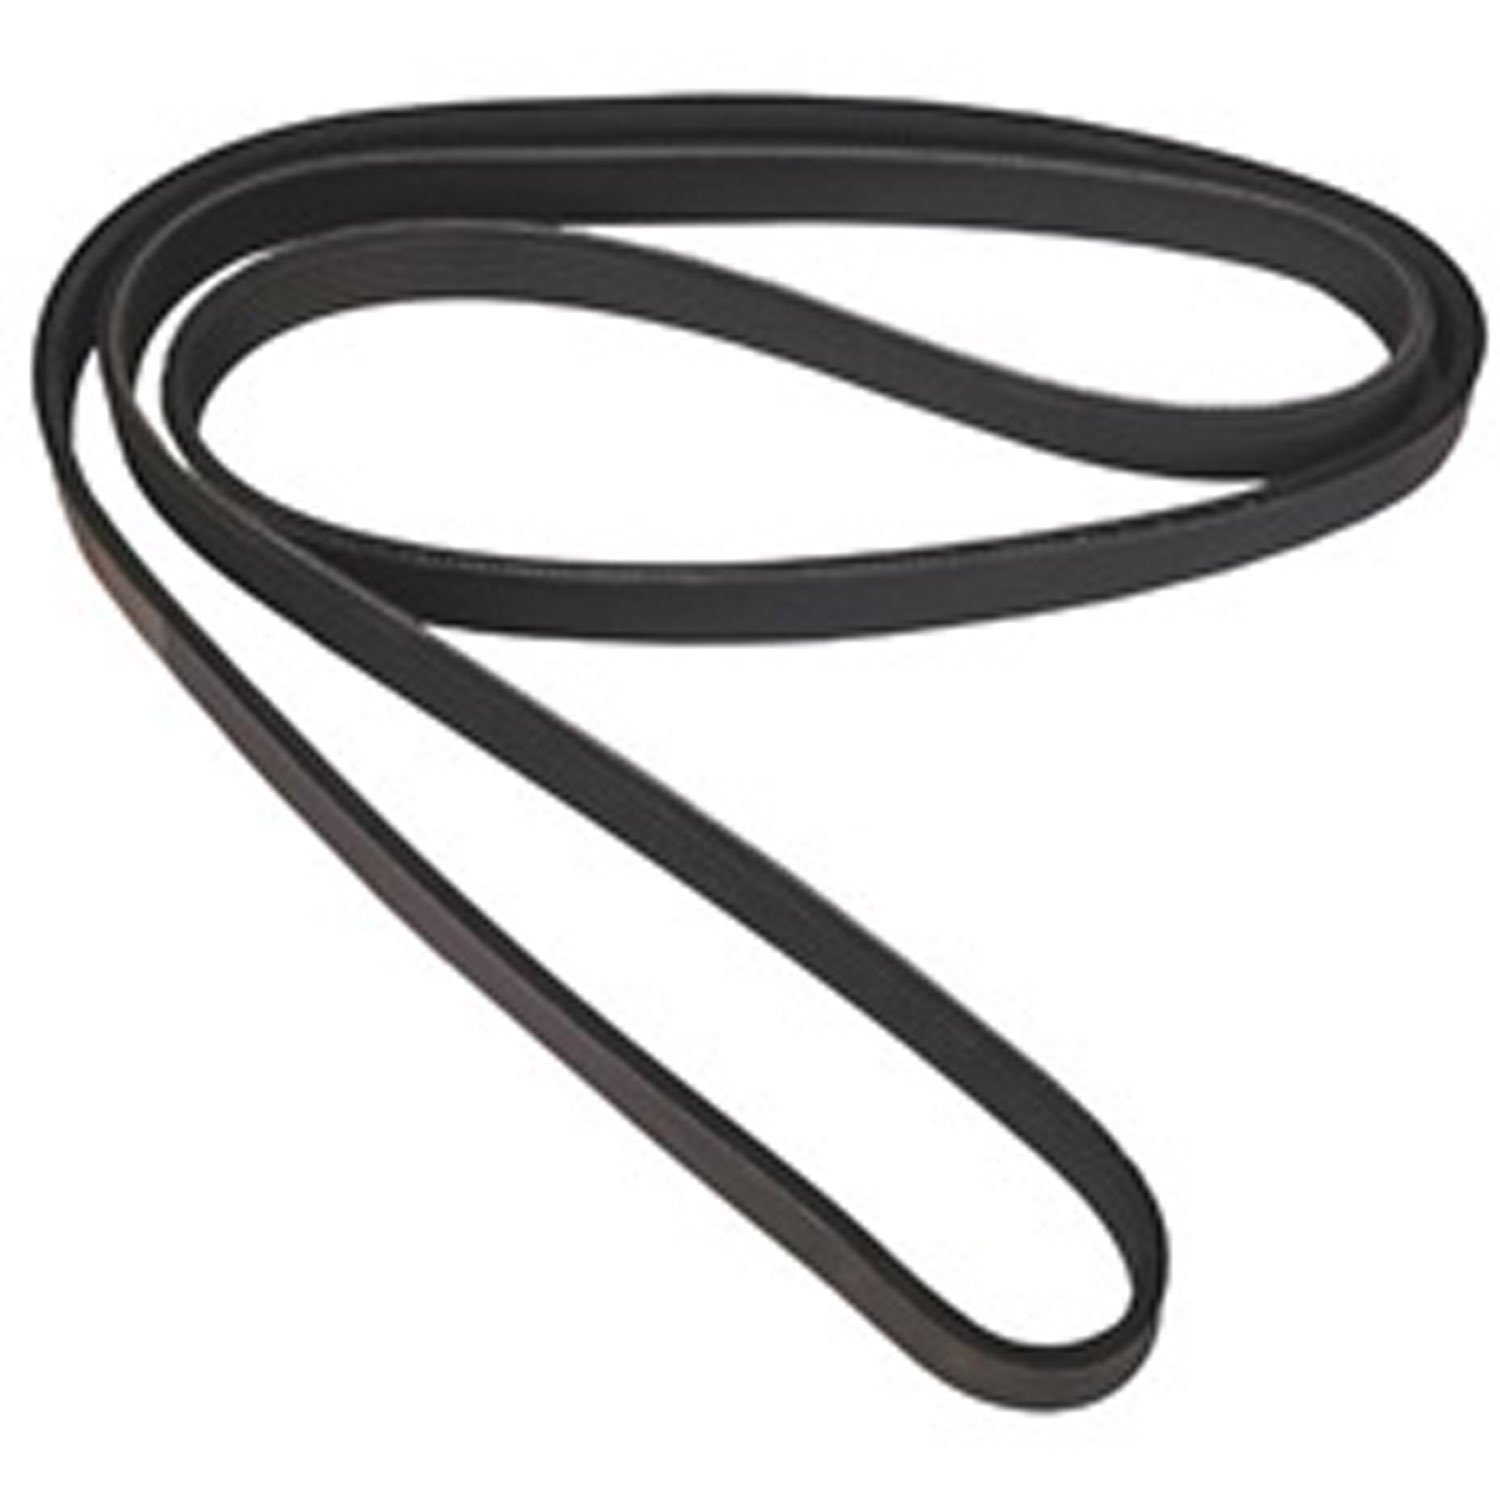 Replacement serpentine belt from Omix-ADA, Fits 02-05 Jeep Liberty KJ and 03-06 Jeep Wrangler TJ